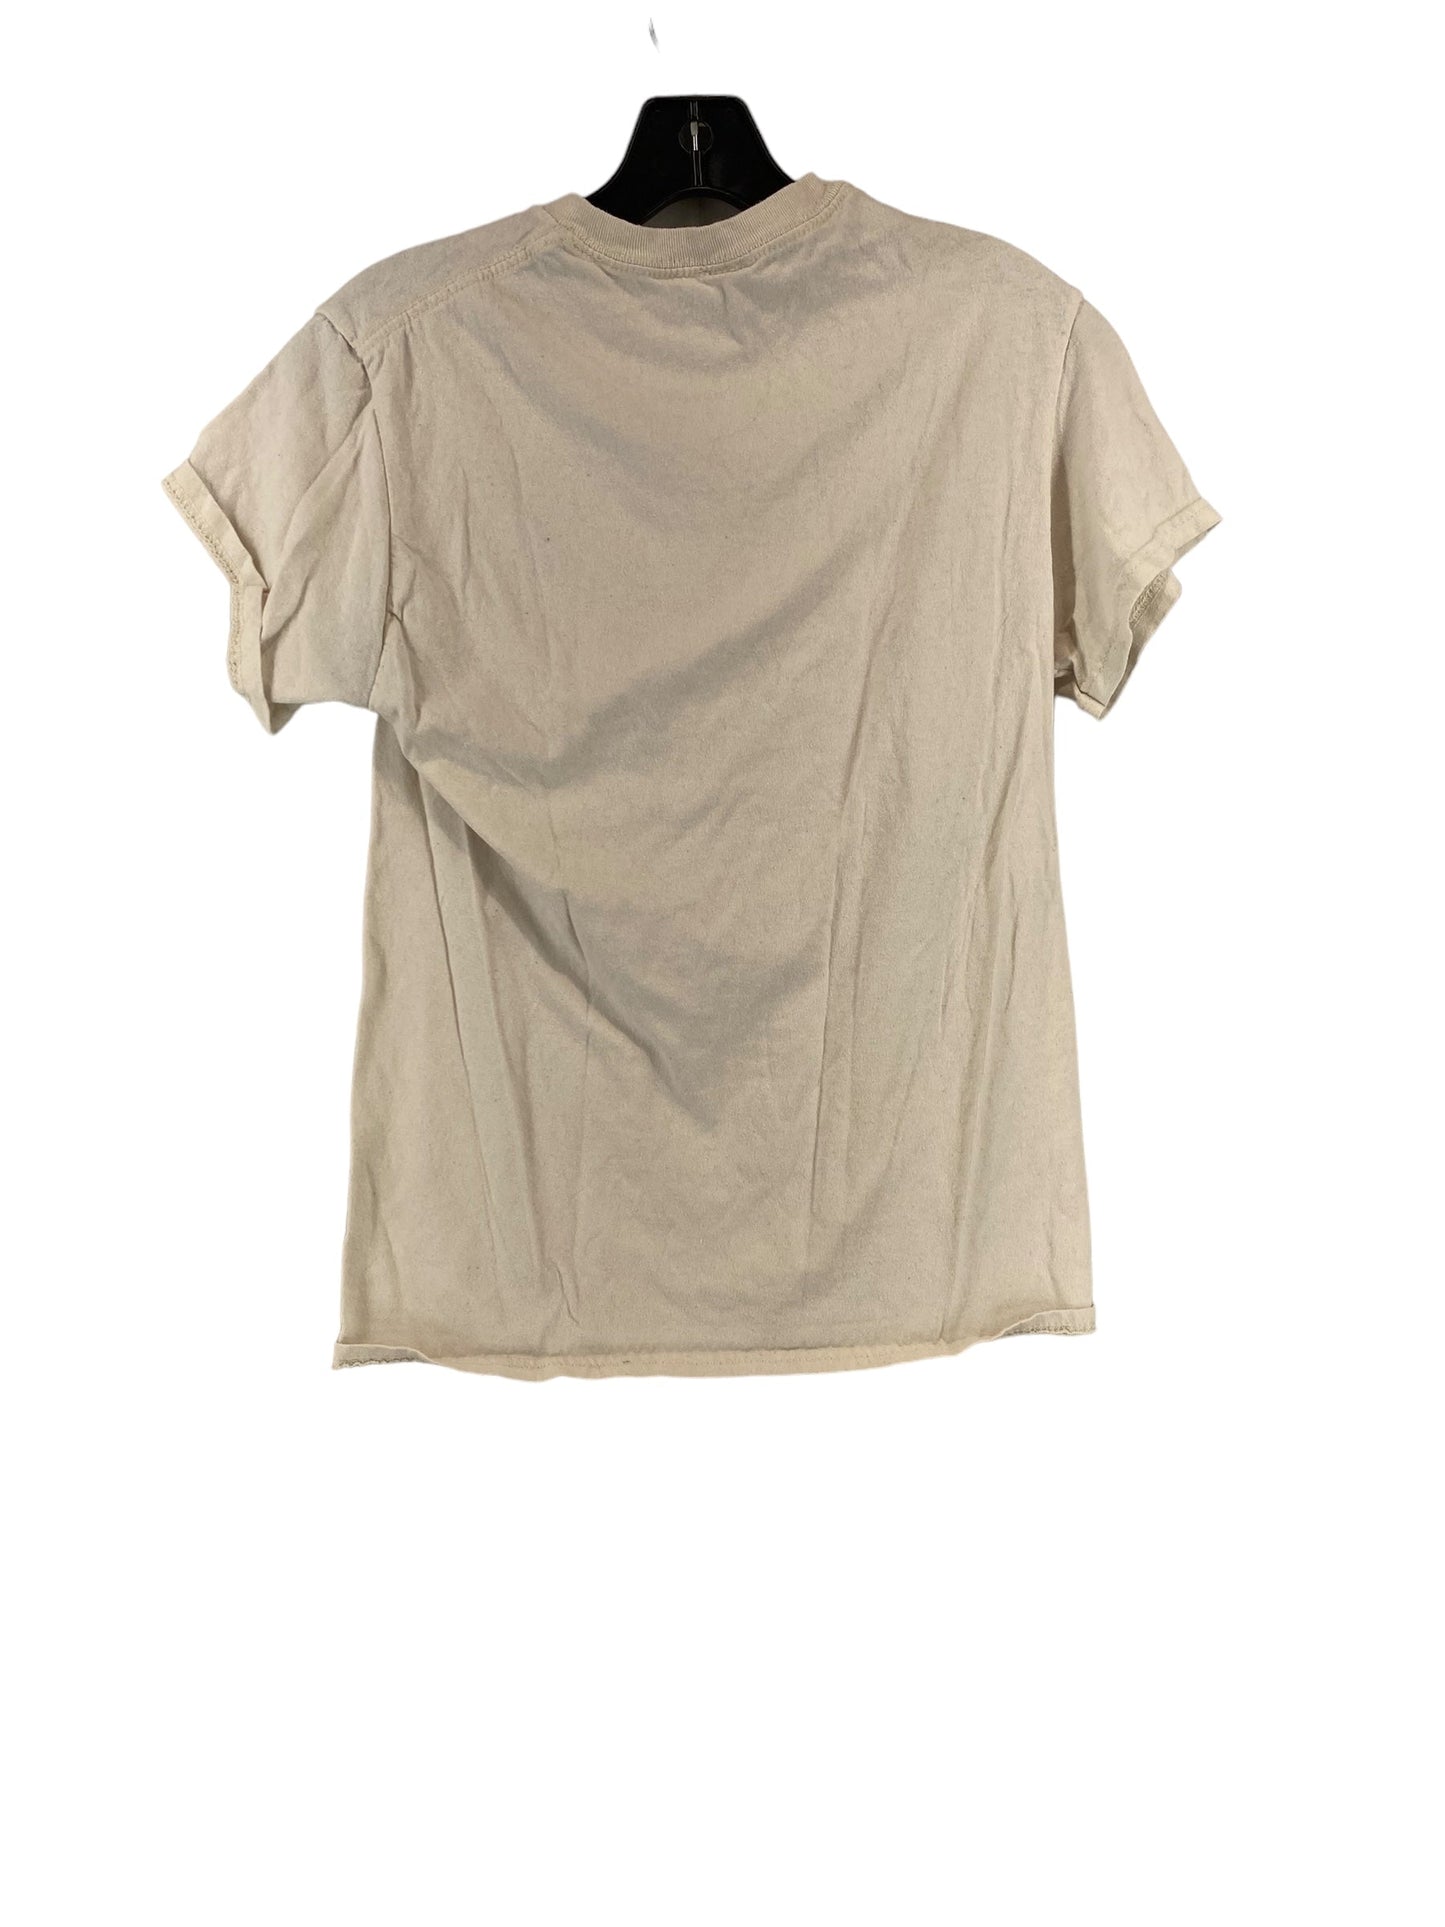 Beige Top Short Sleeve Altard State, Size Xs